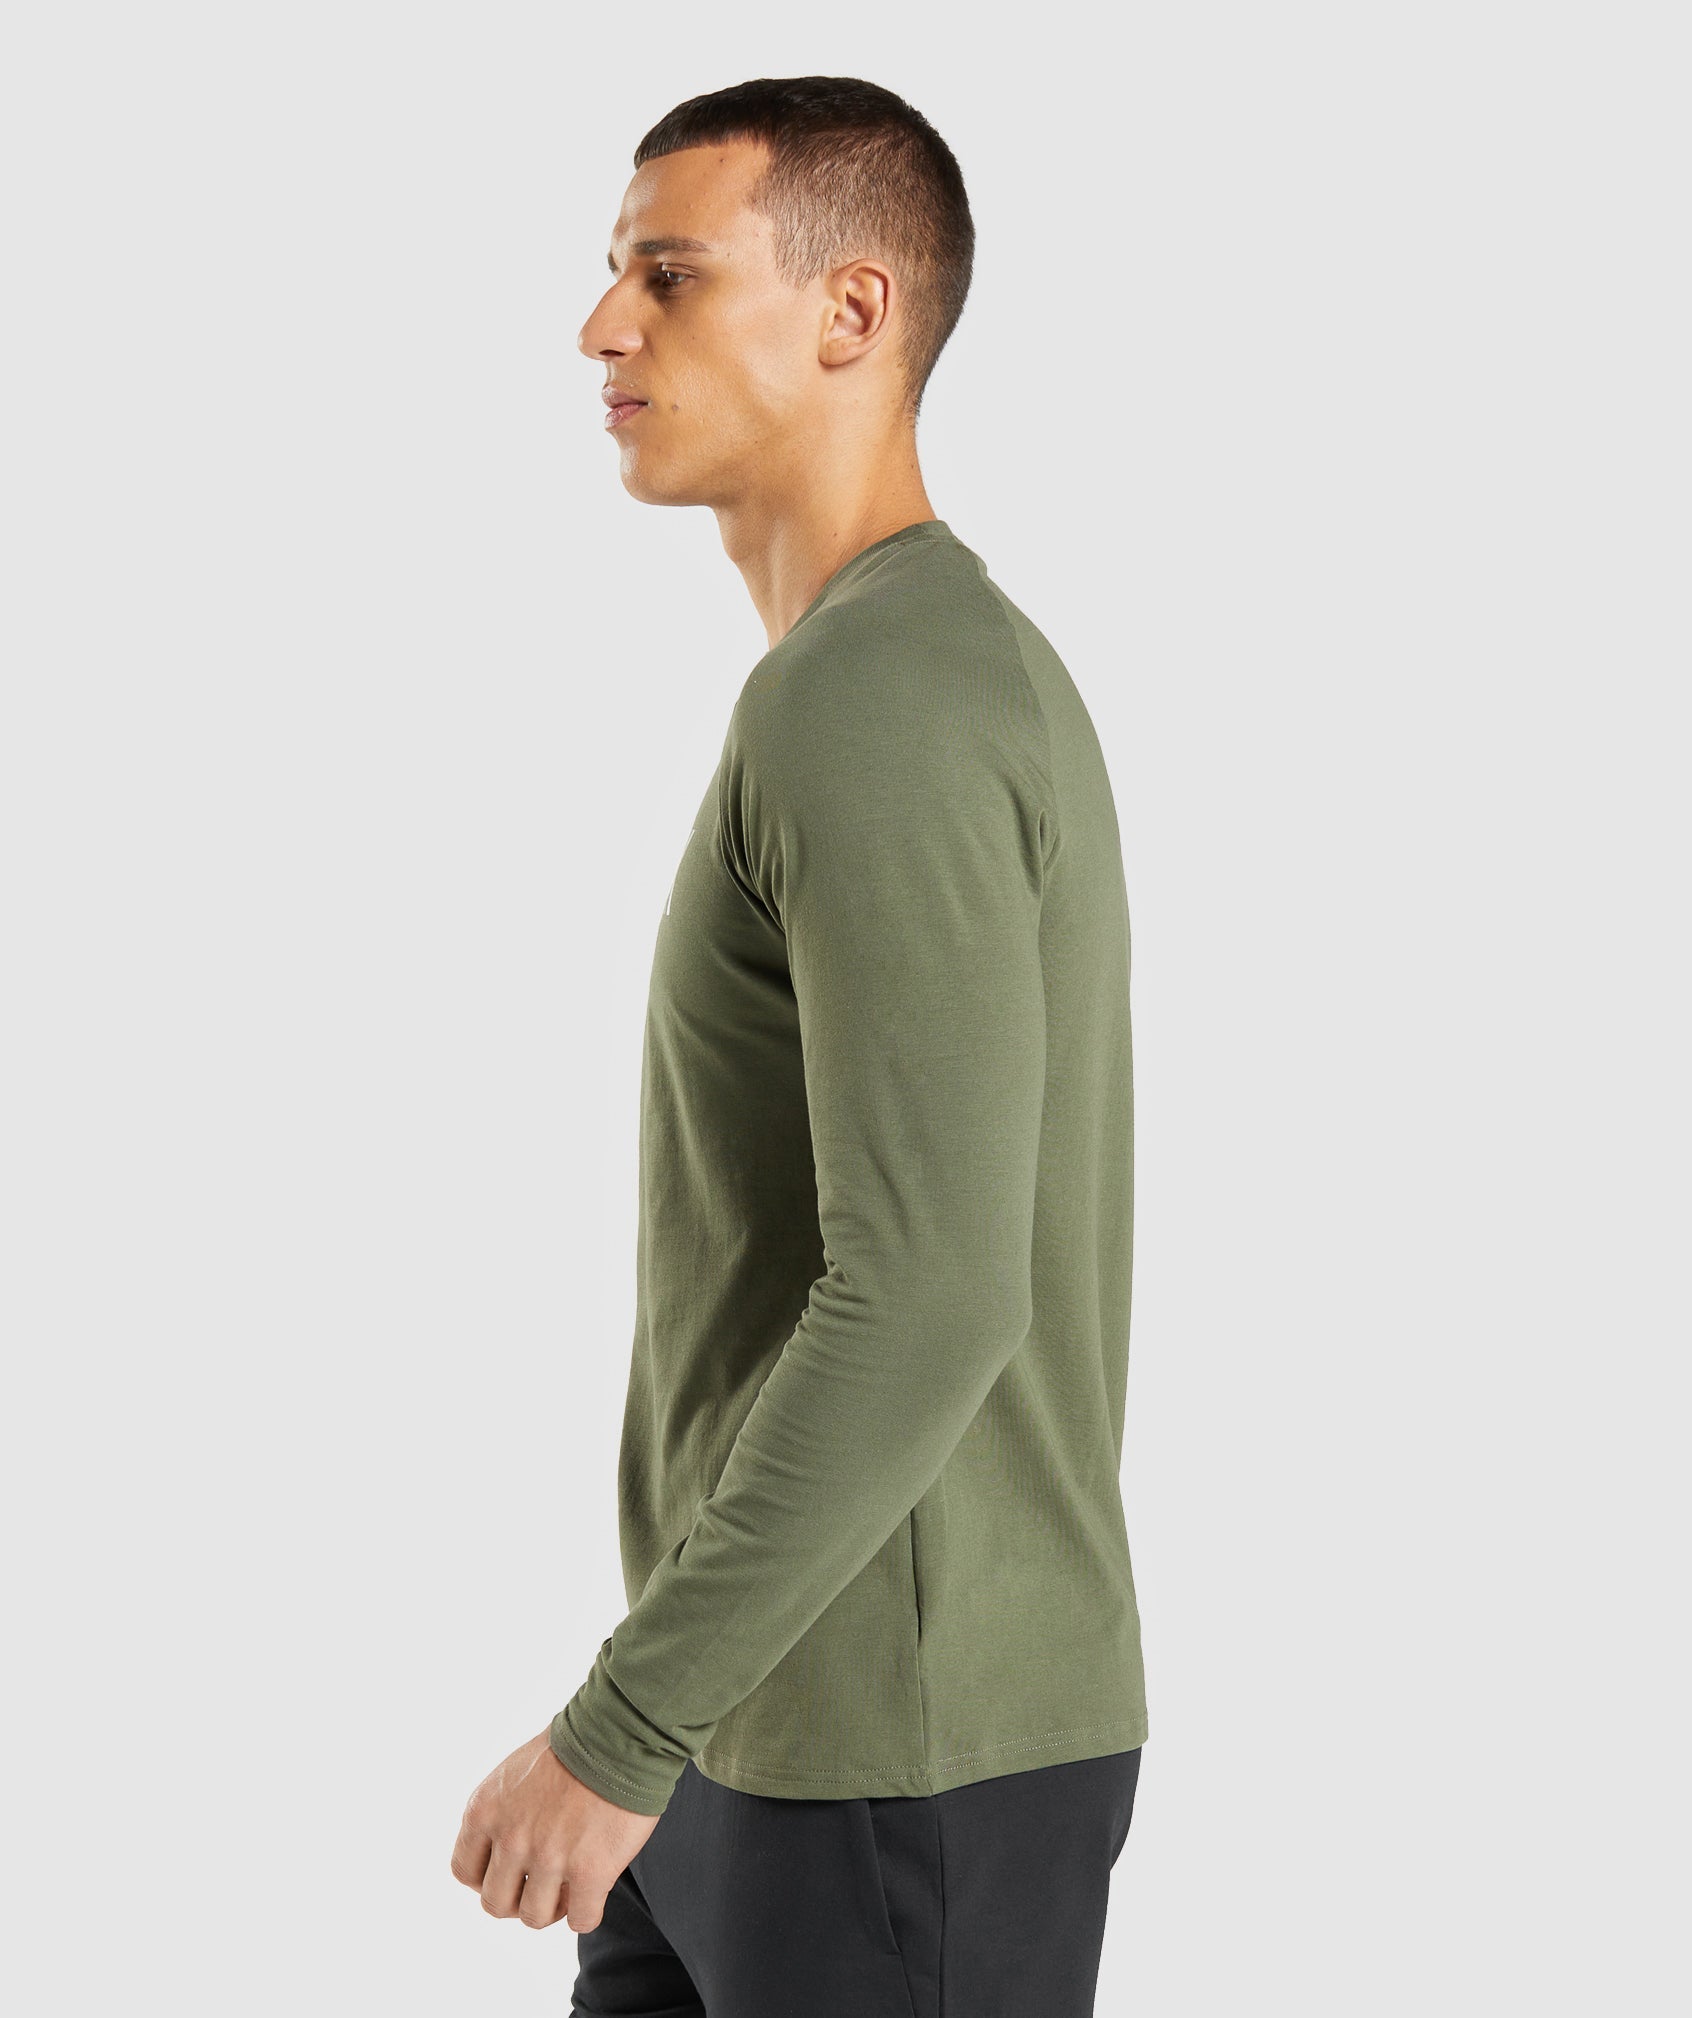 Apollo Long Sleeve T-Shirt in Core Olive - view 4